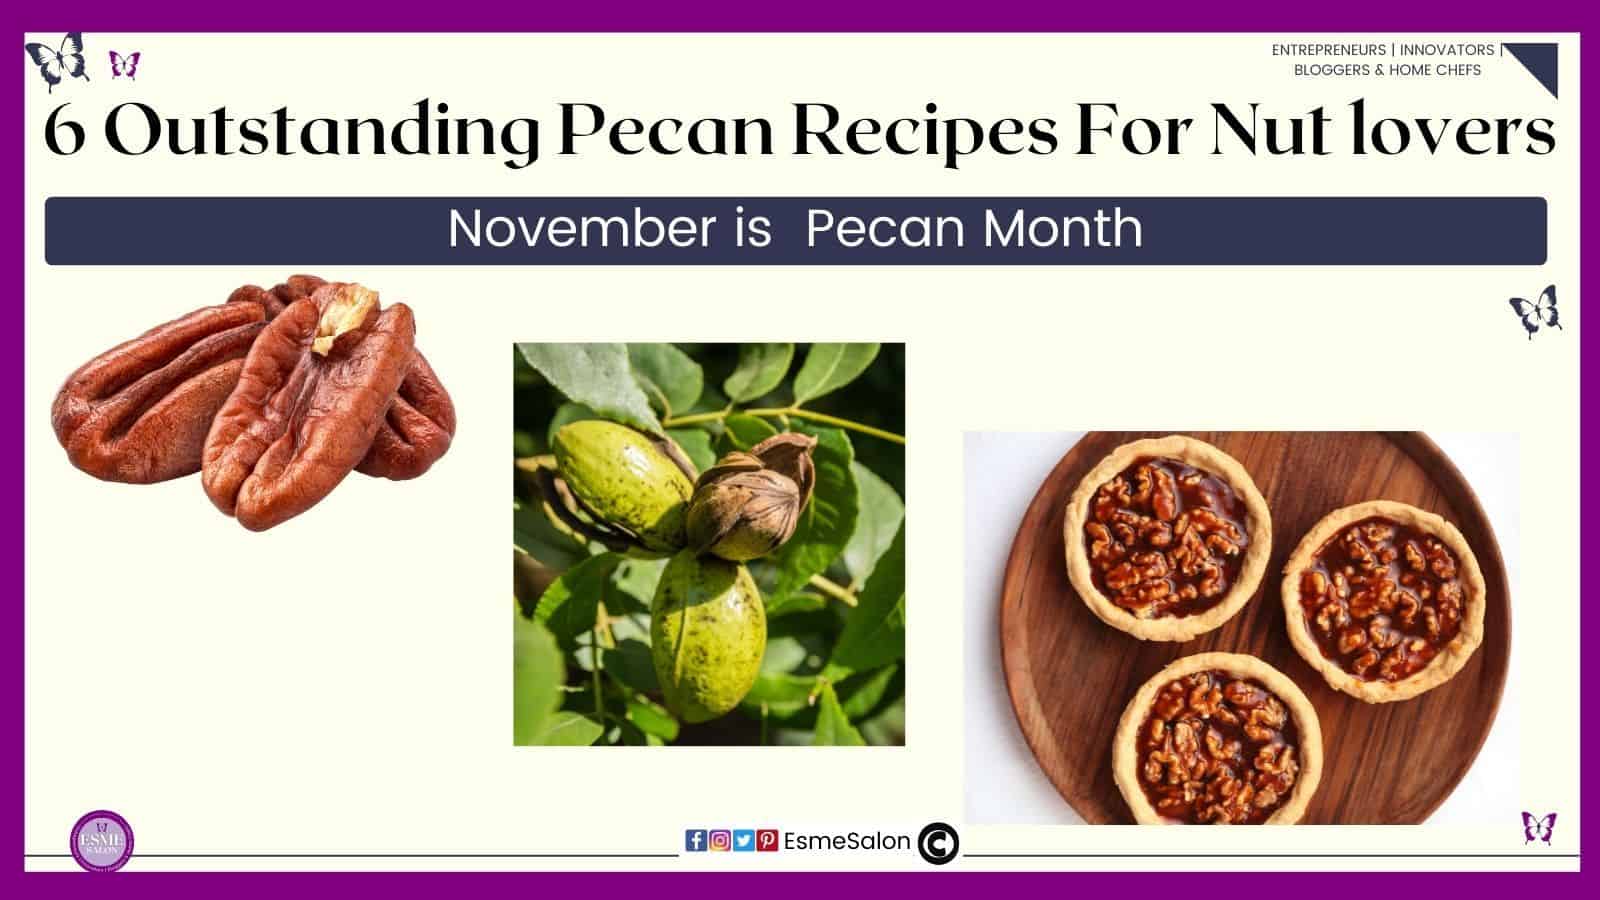 an image of pecan nuts, a tree with pecan nuts and pecan pies